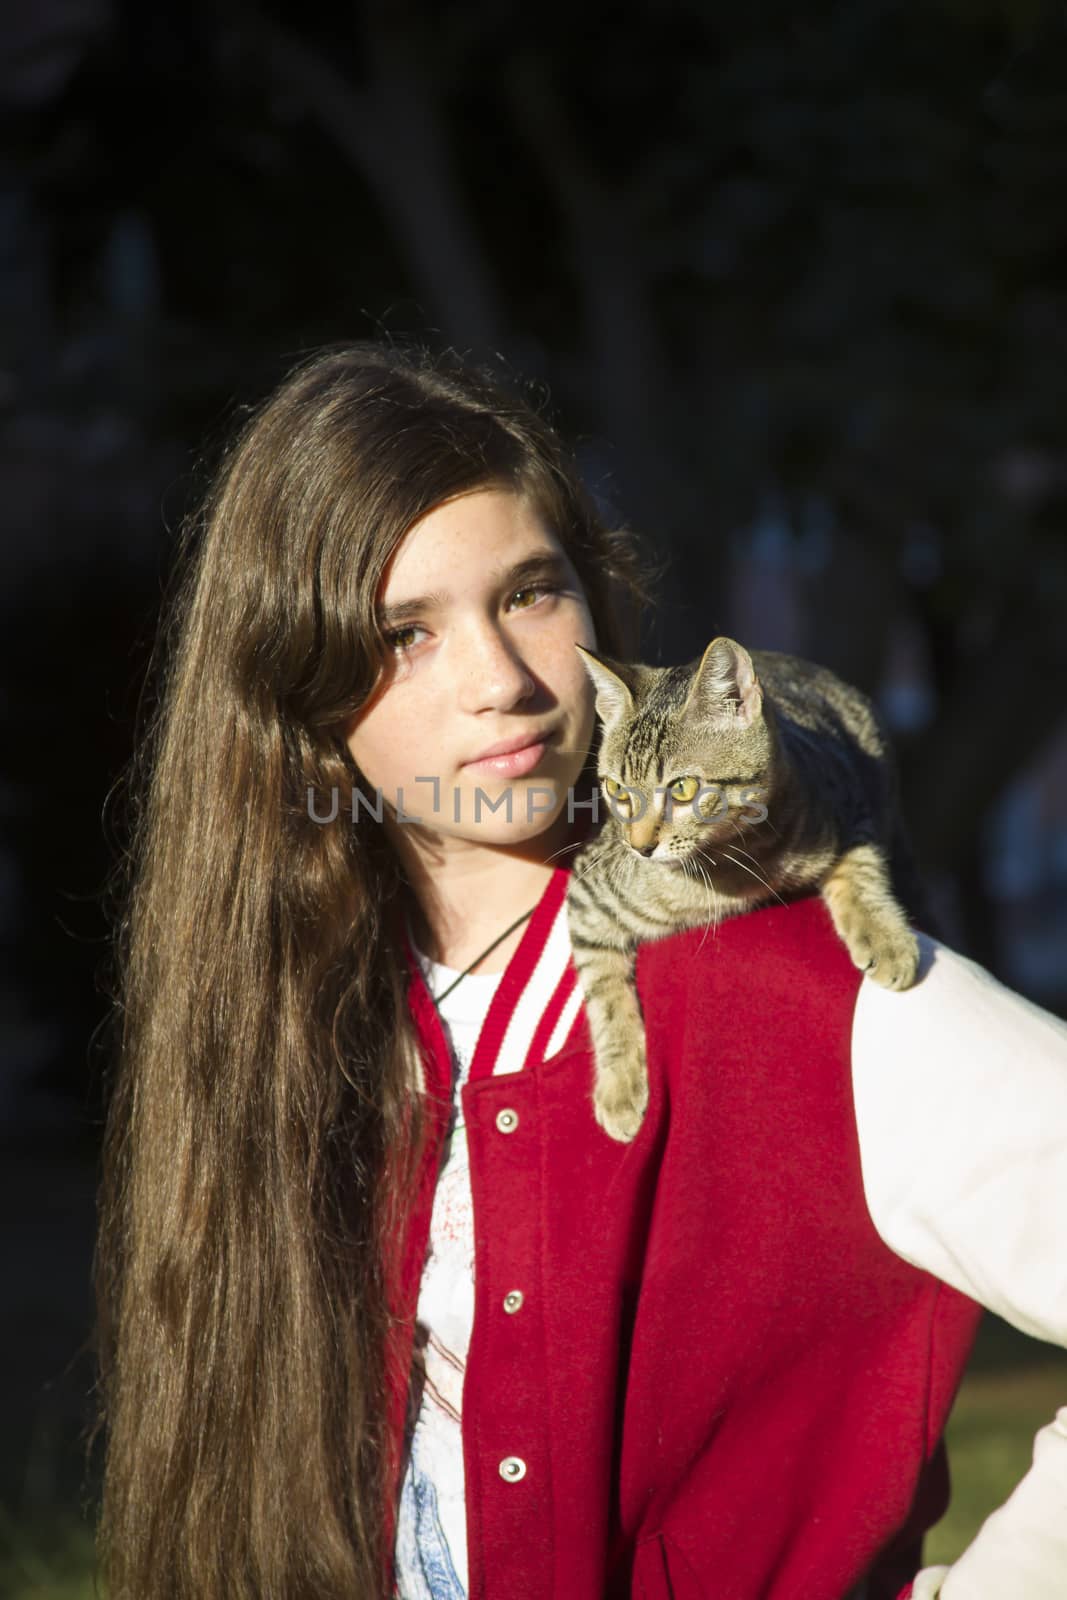 Autumn sunny photo of teenage girl close-up, with a cat sitting on her shoulder, street photo on dark background.